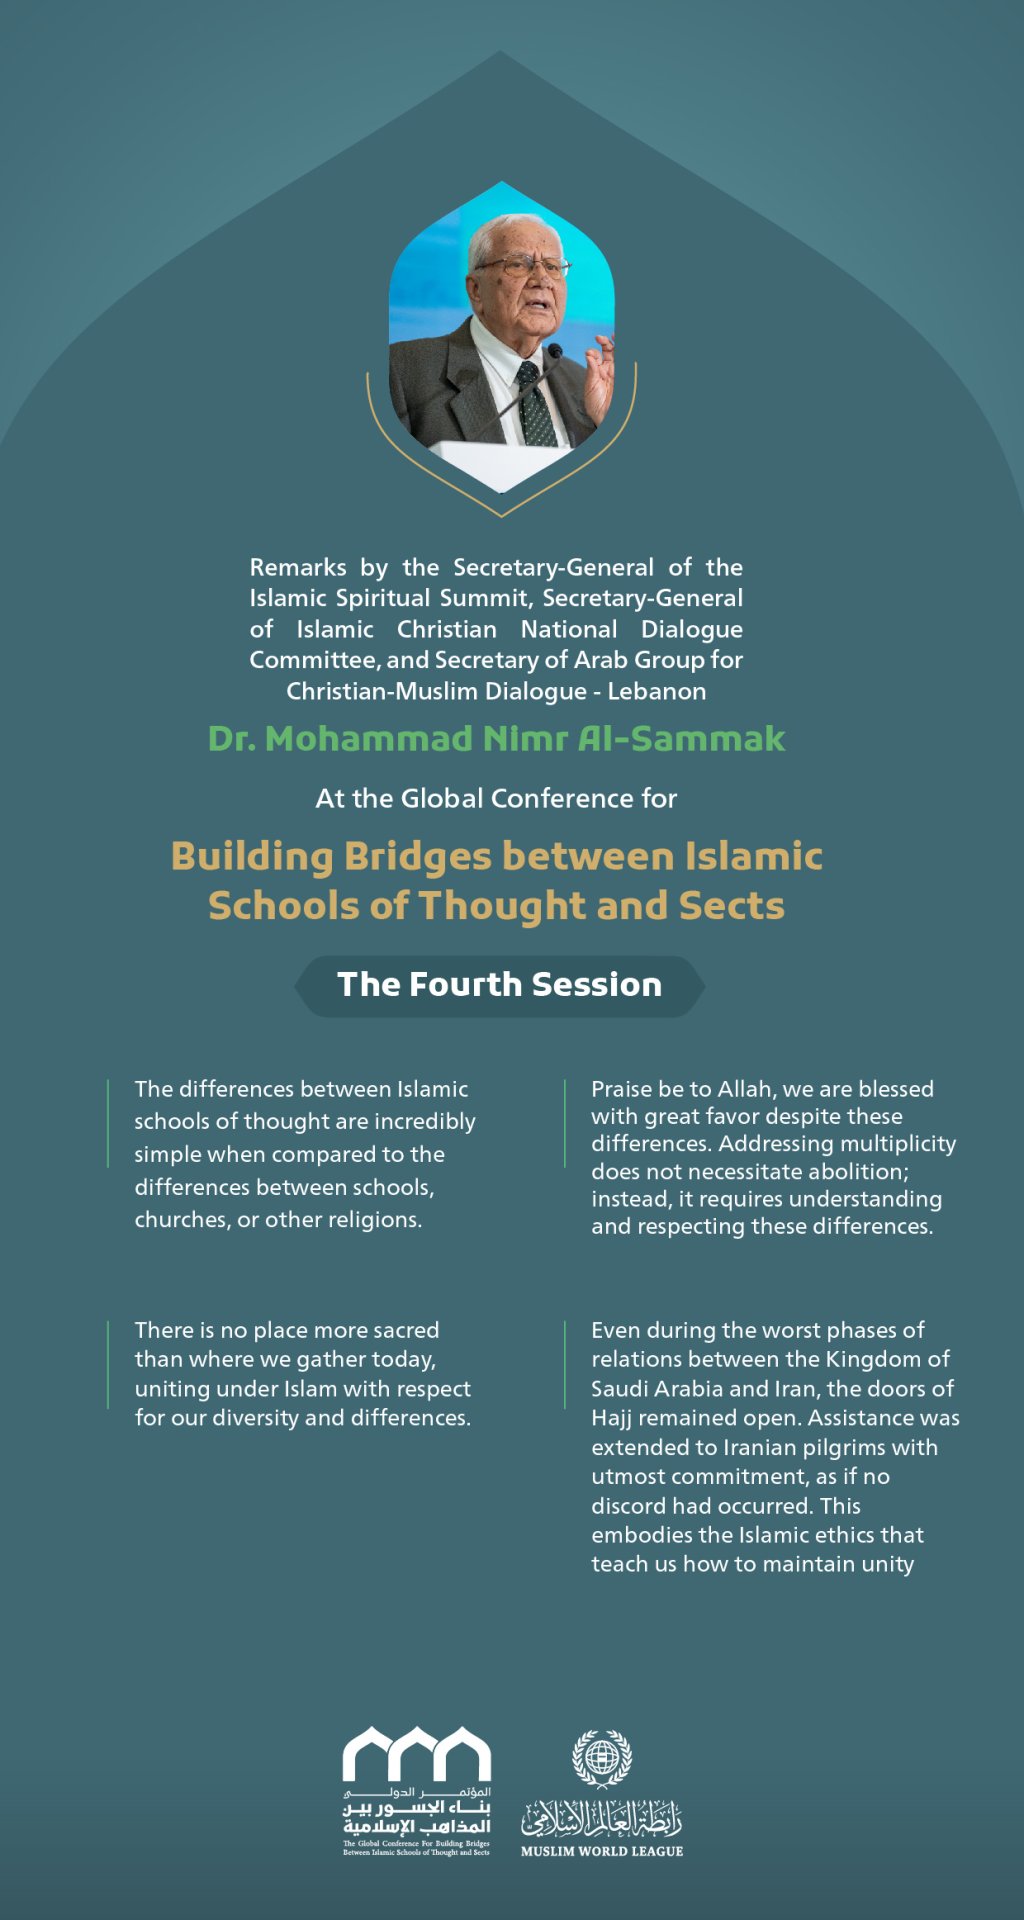 Remarks by His Excellency Dr. Mohammad Nimr Al-Sammak, the Secretary-General of the Islamic Spiritual Summit and Secretary-General of Islamic Christian National Dialogue Committee, at the Global Conference for Building Bridges between Islamic Schools of Thought and Sects